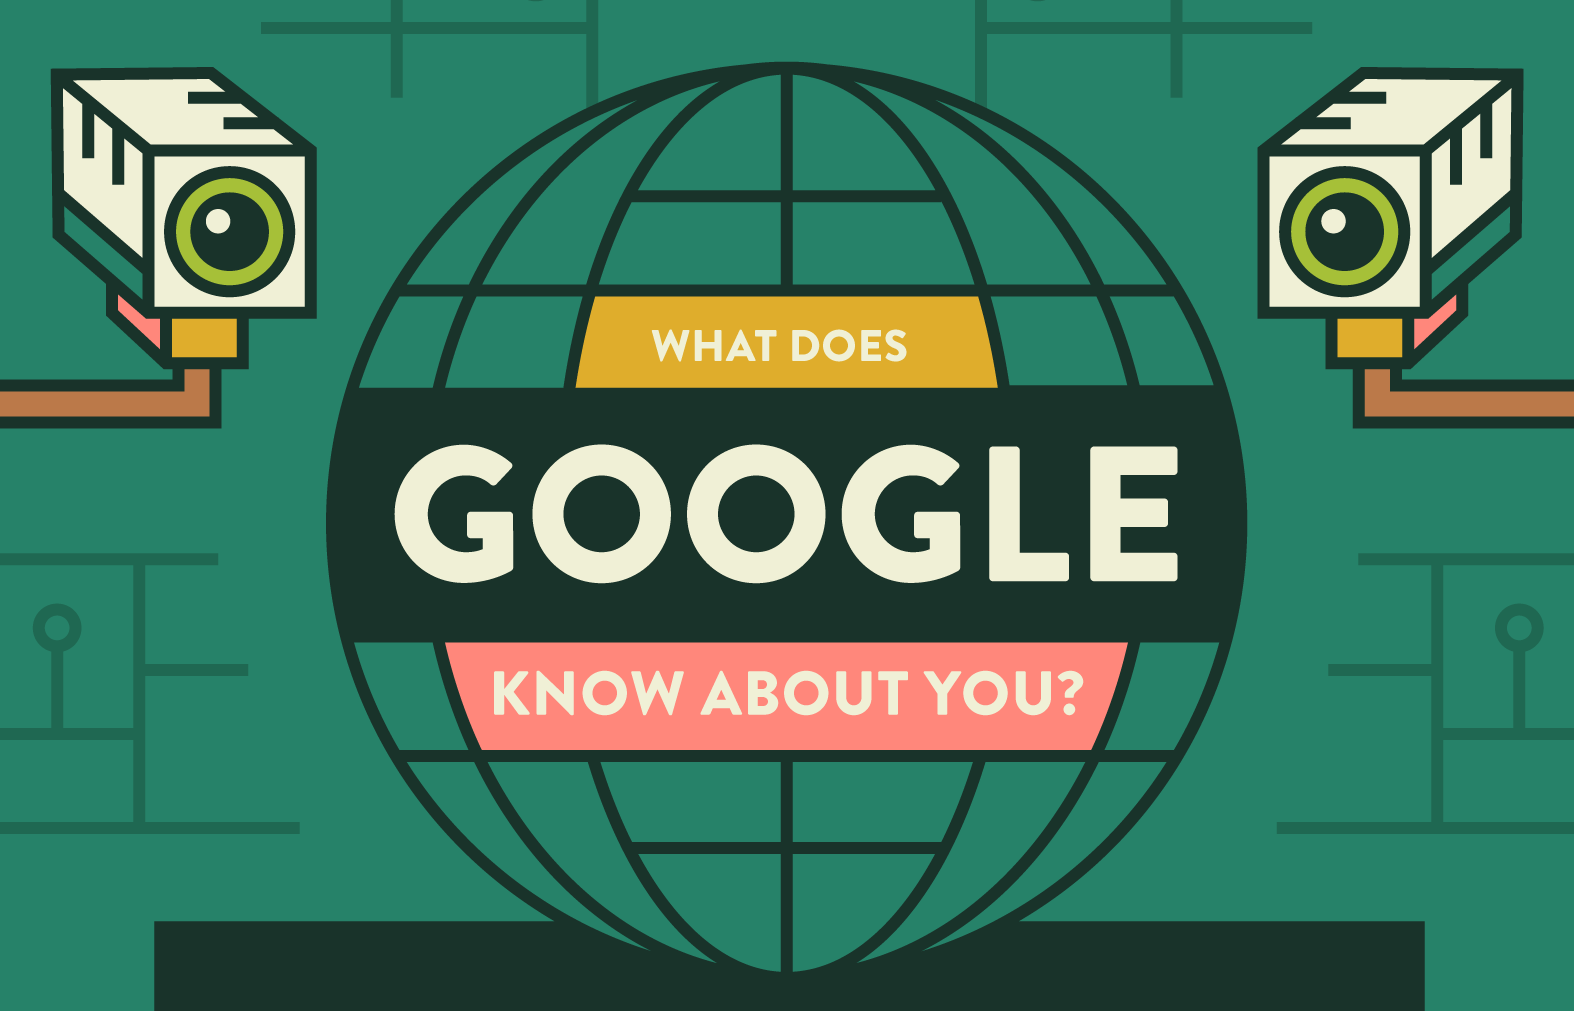 How much does Google know about you? – Infographic